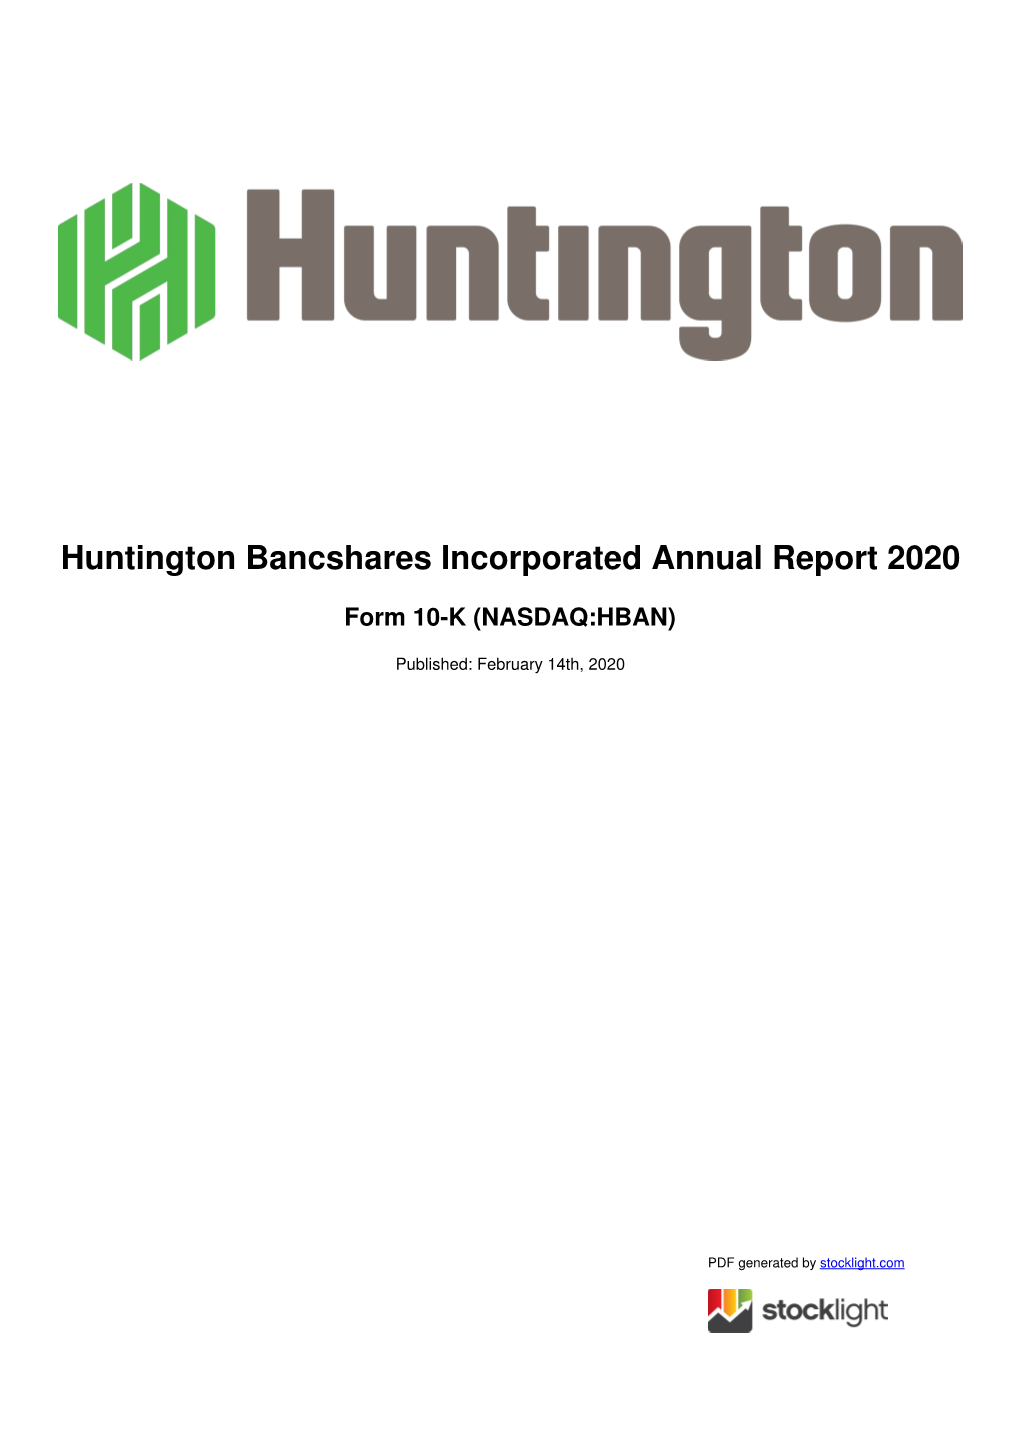 Huntington Bancshares Incorporated Annual Report 2020